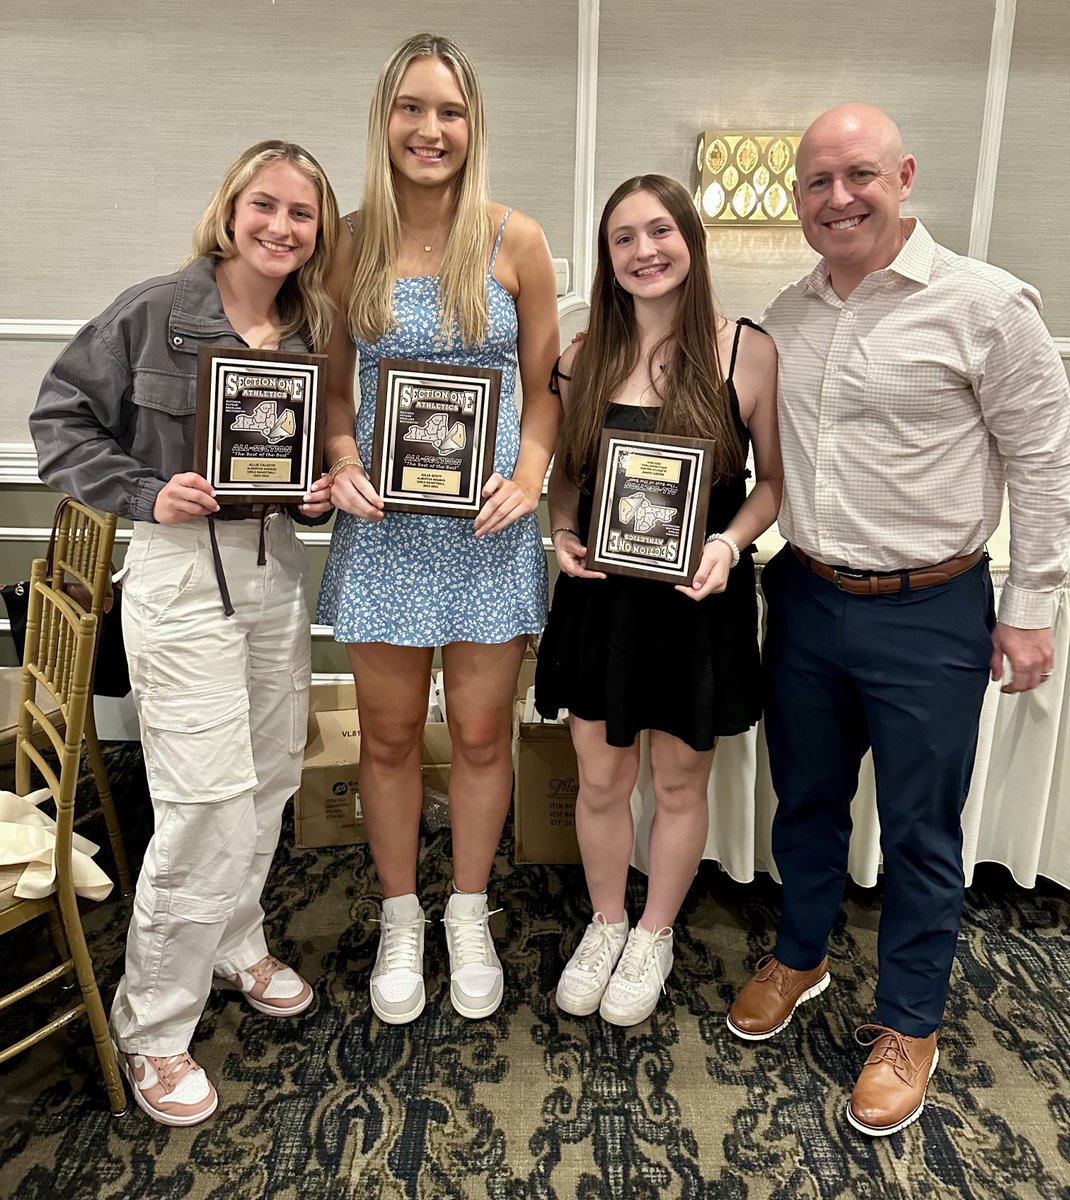 Congratulations to our 3 All Section players! So proud! ⁦@maddy_zuppe⁩ ⁦@alliefalesto⁩ ⁦@juliascott2026⁩ ⁦@AMHSFalcons⁩